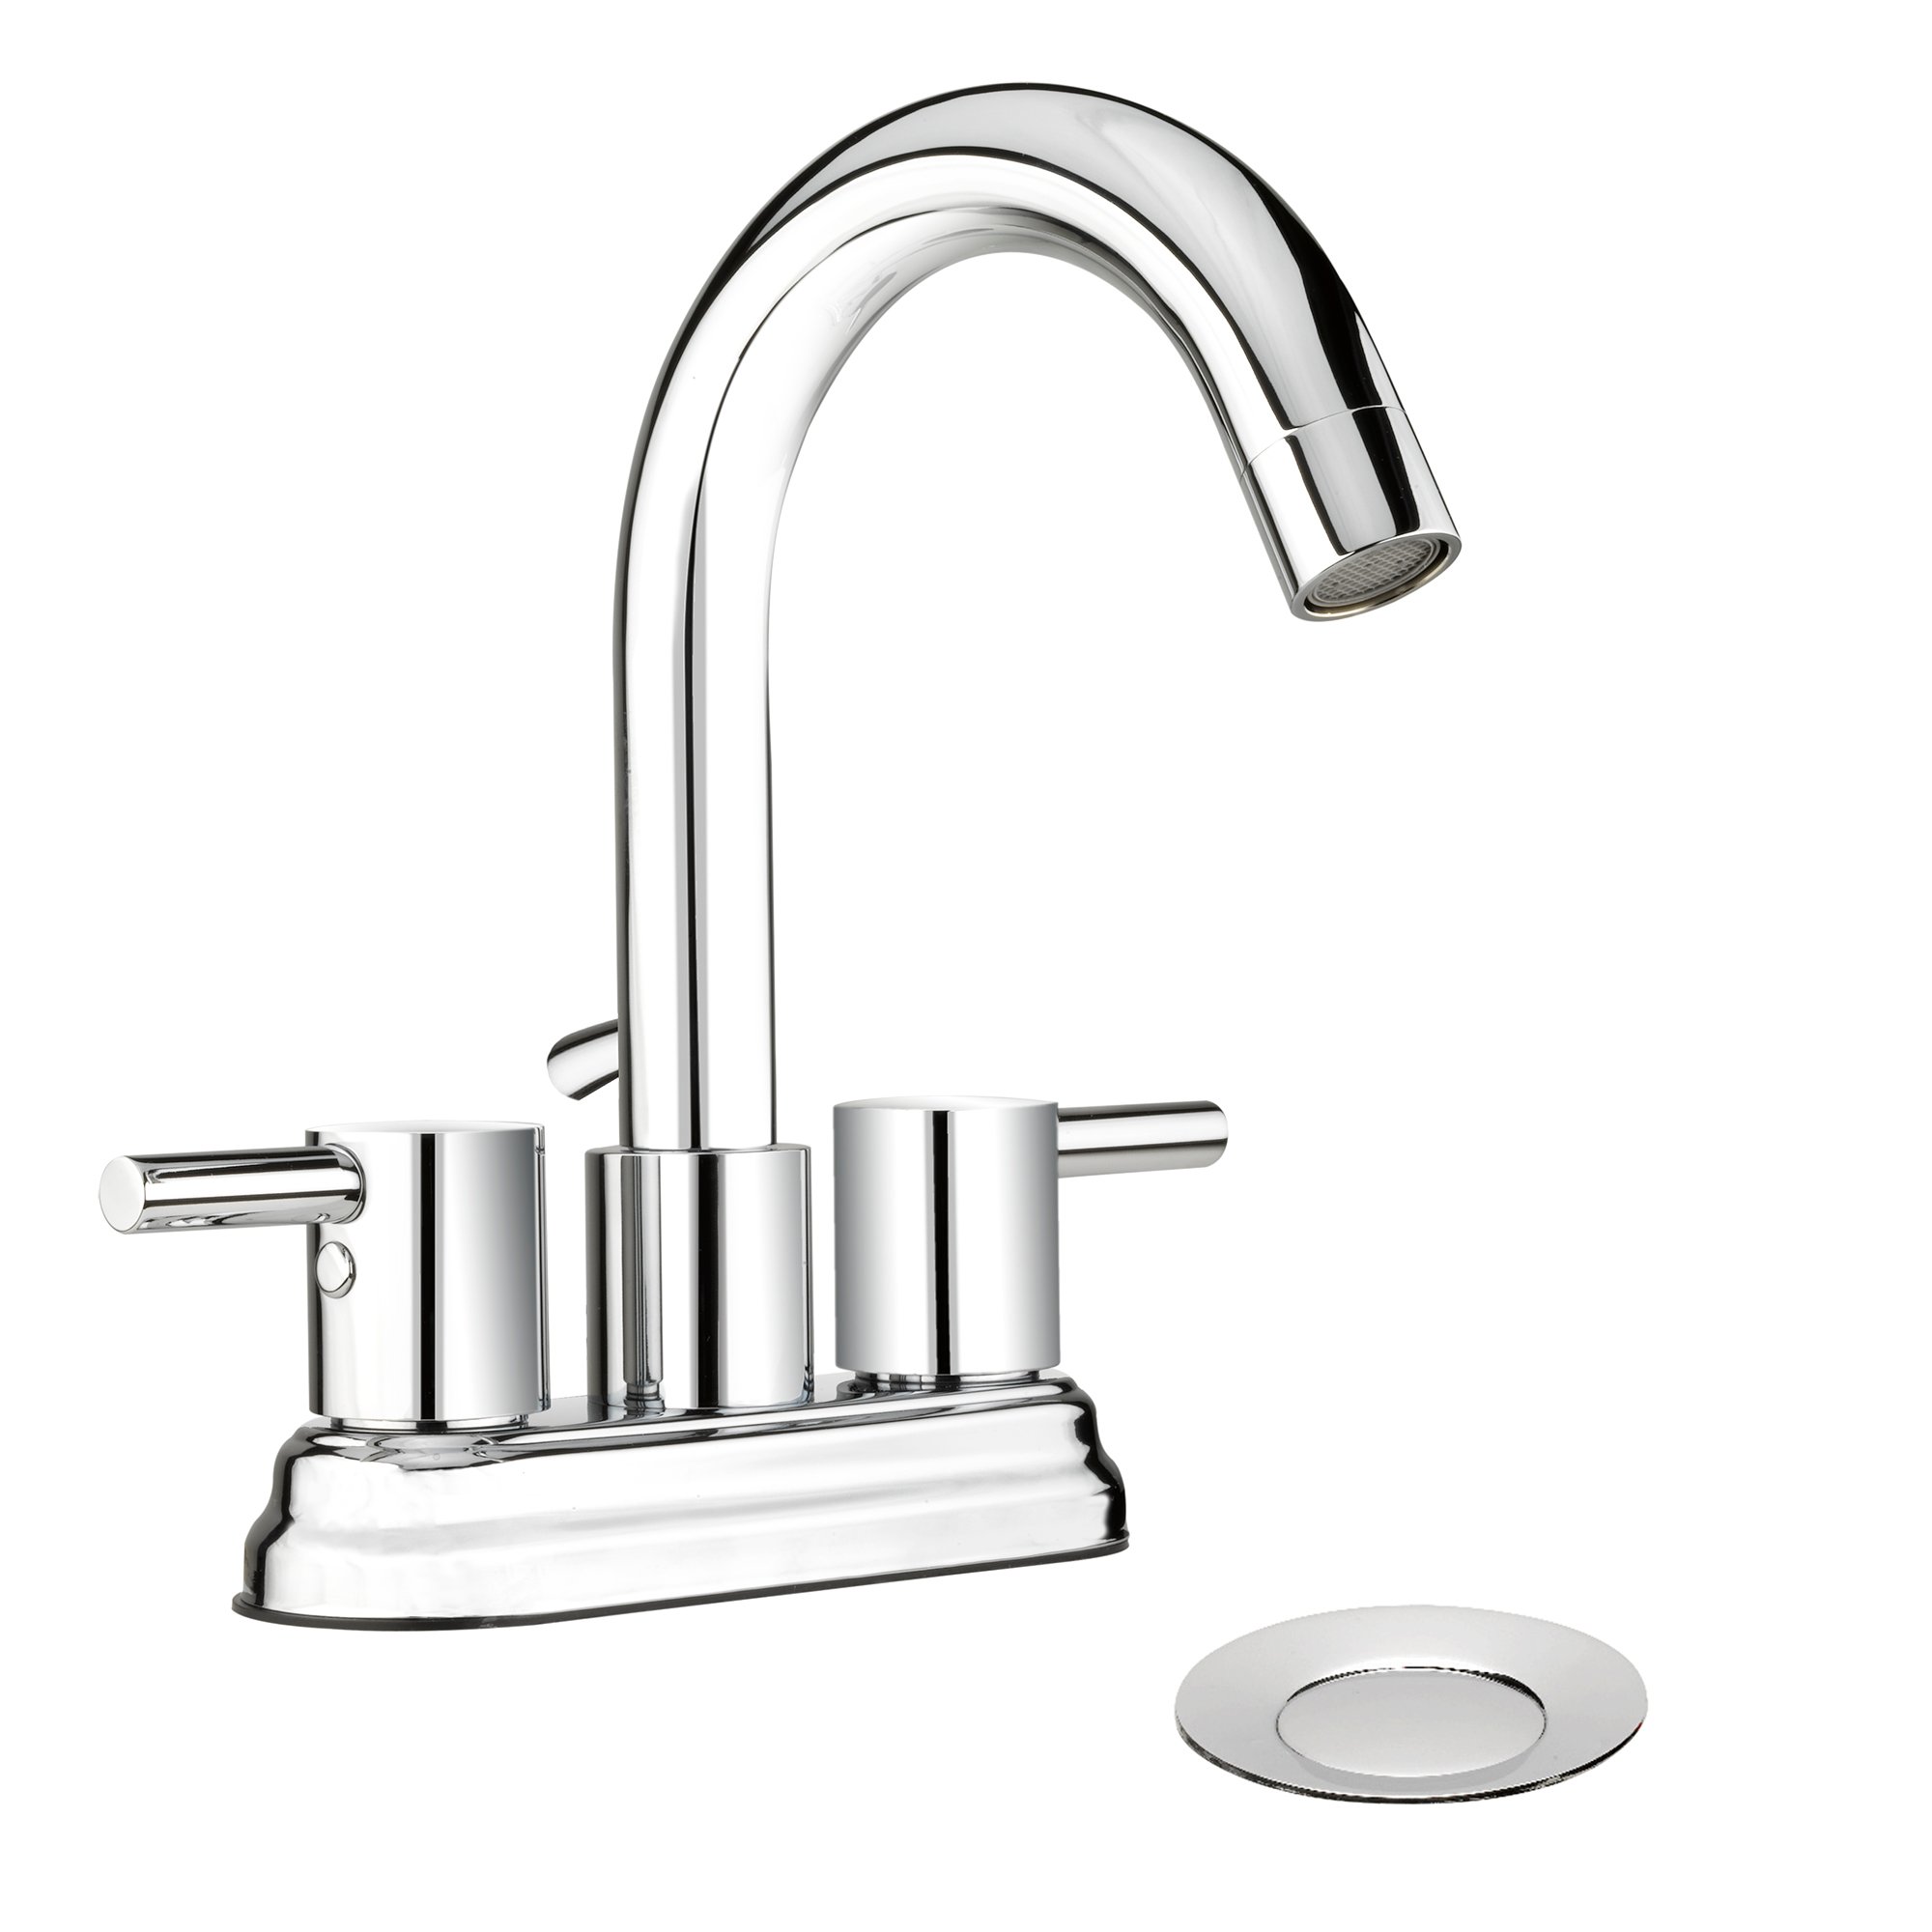 Del74ccp 7 X 6.5 X 12 In. Bathroom Sink Faucet With 2 Handles & 4 In. Centerset, Polished Chrome